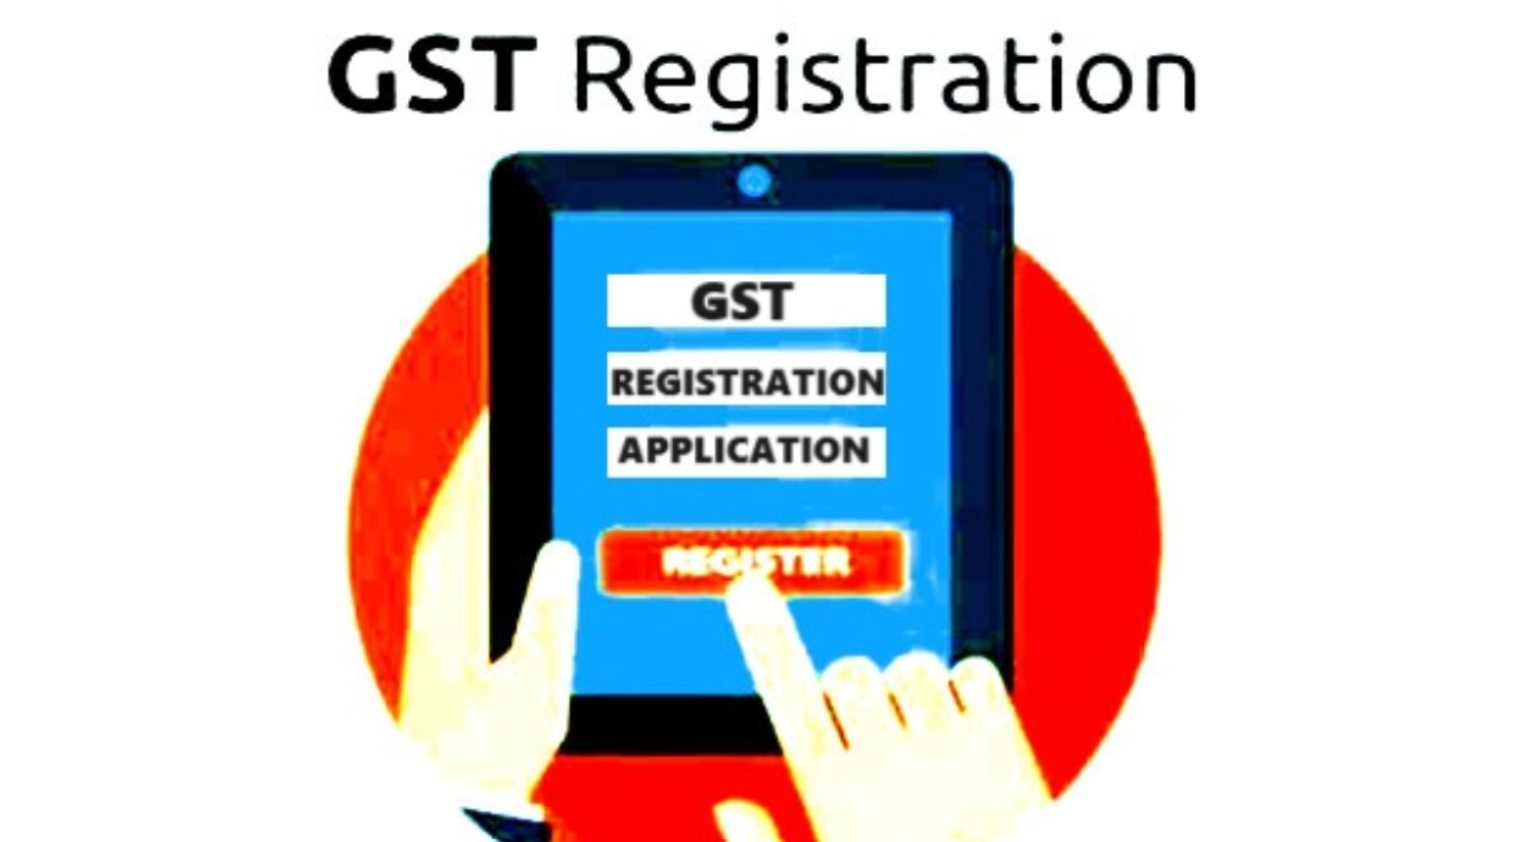 GSTN Advisory on Delays in GST Registration Processing within 30 Days After Aadhaar Verification